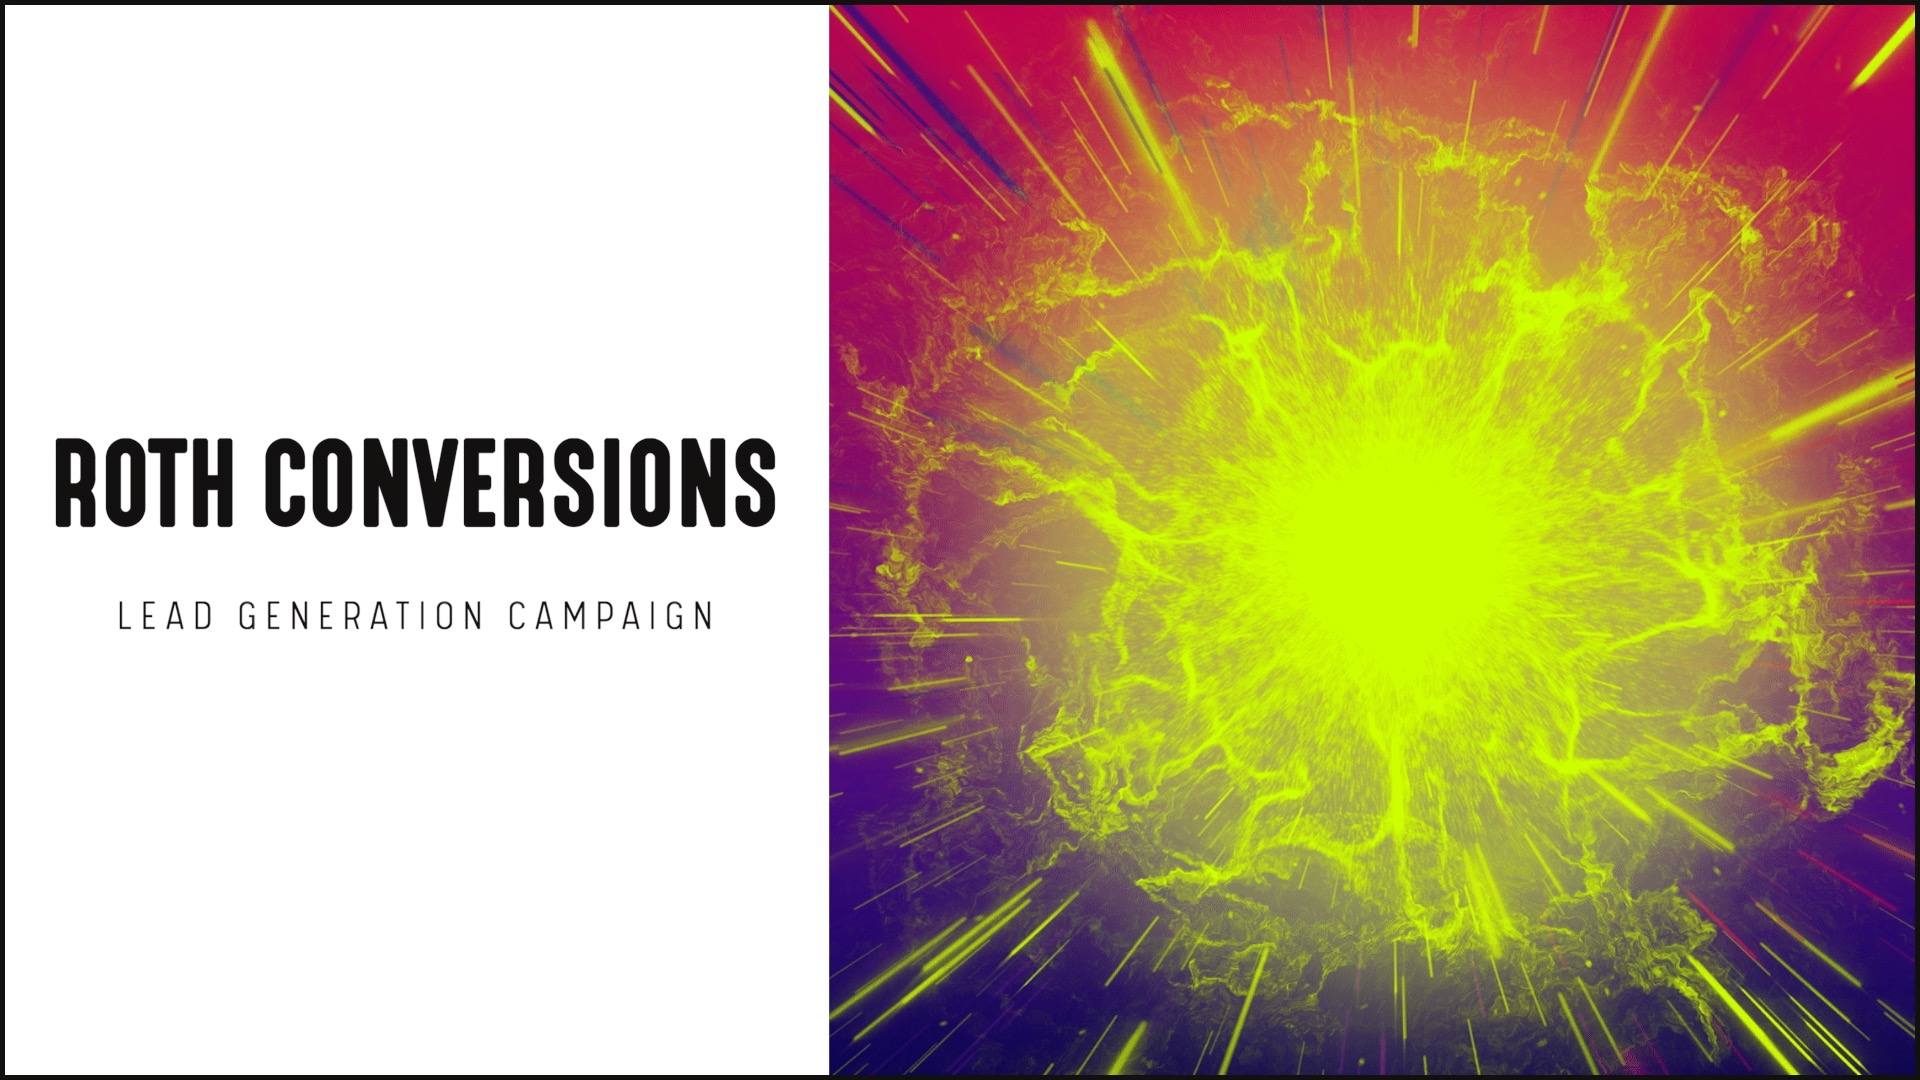 [NEW] Roth Conversions - Lead Generation Campaign